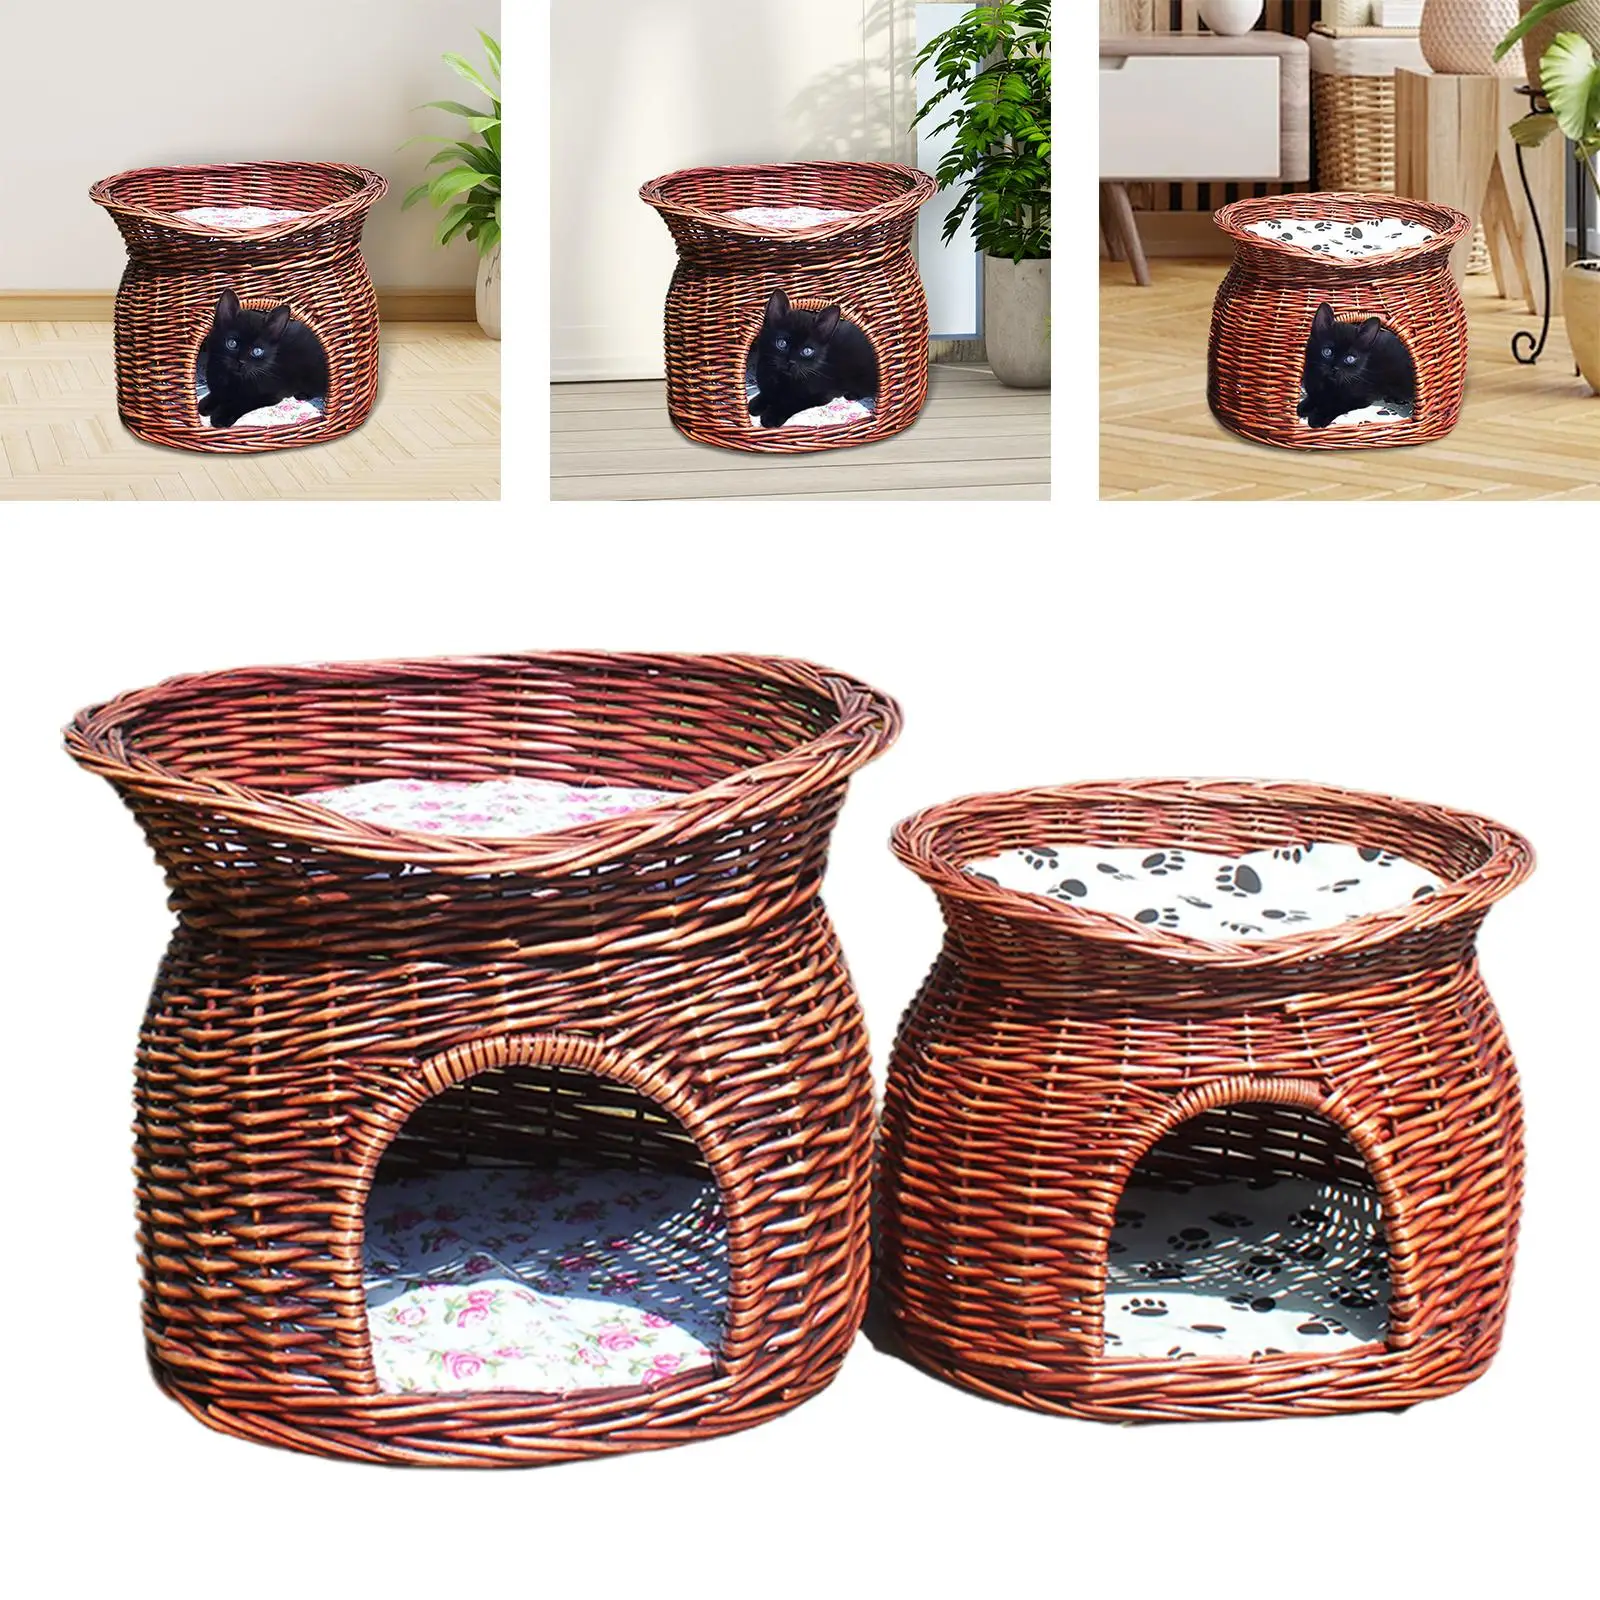 Pet House Rattan Woven Semi Enclosed Summer Kitten Cave Tent with Cushion Cat Nest Dog Bed Kitten House Wicker Basket Cat Bed